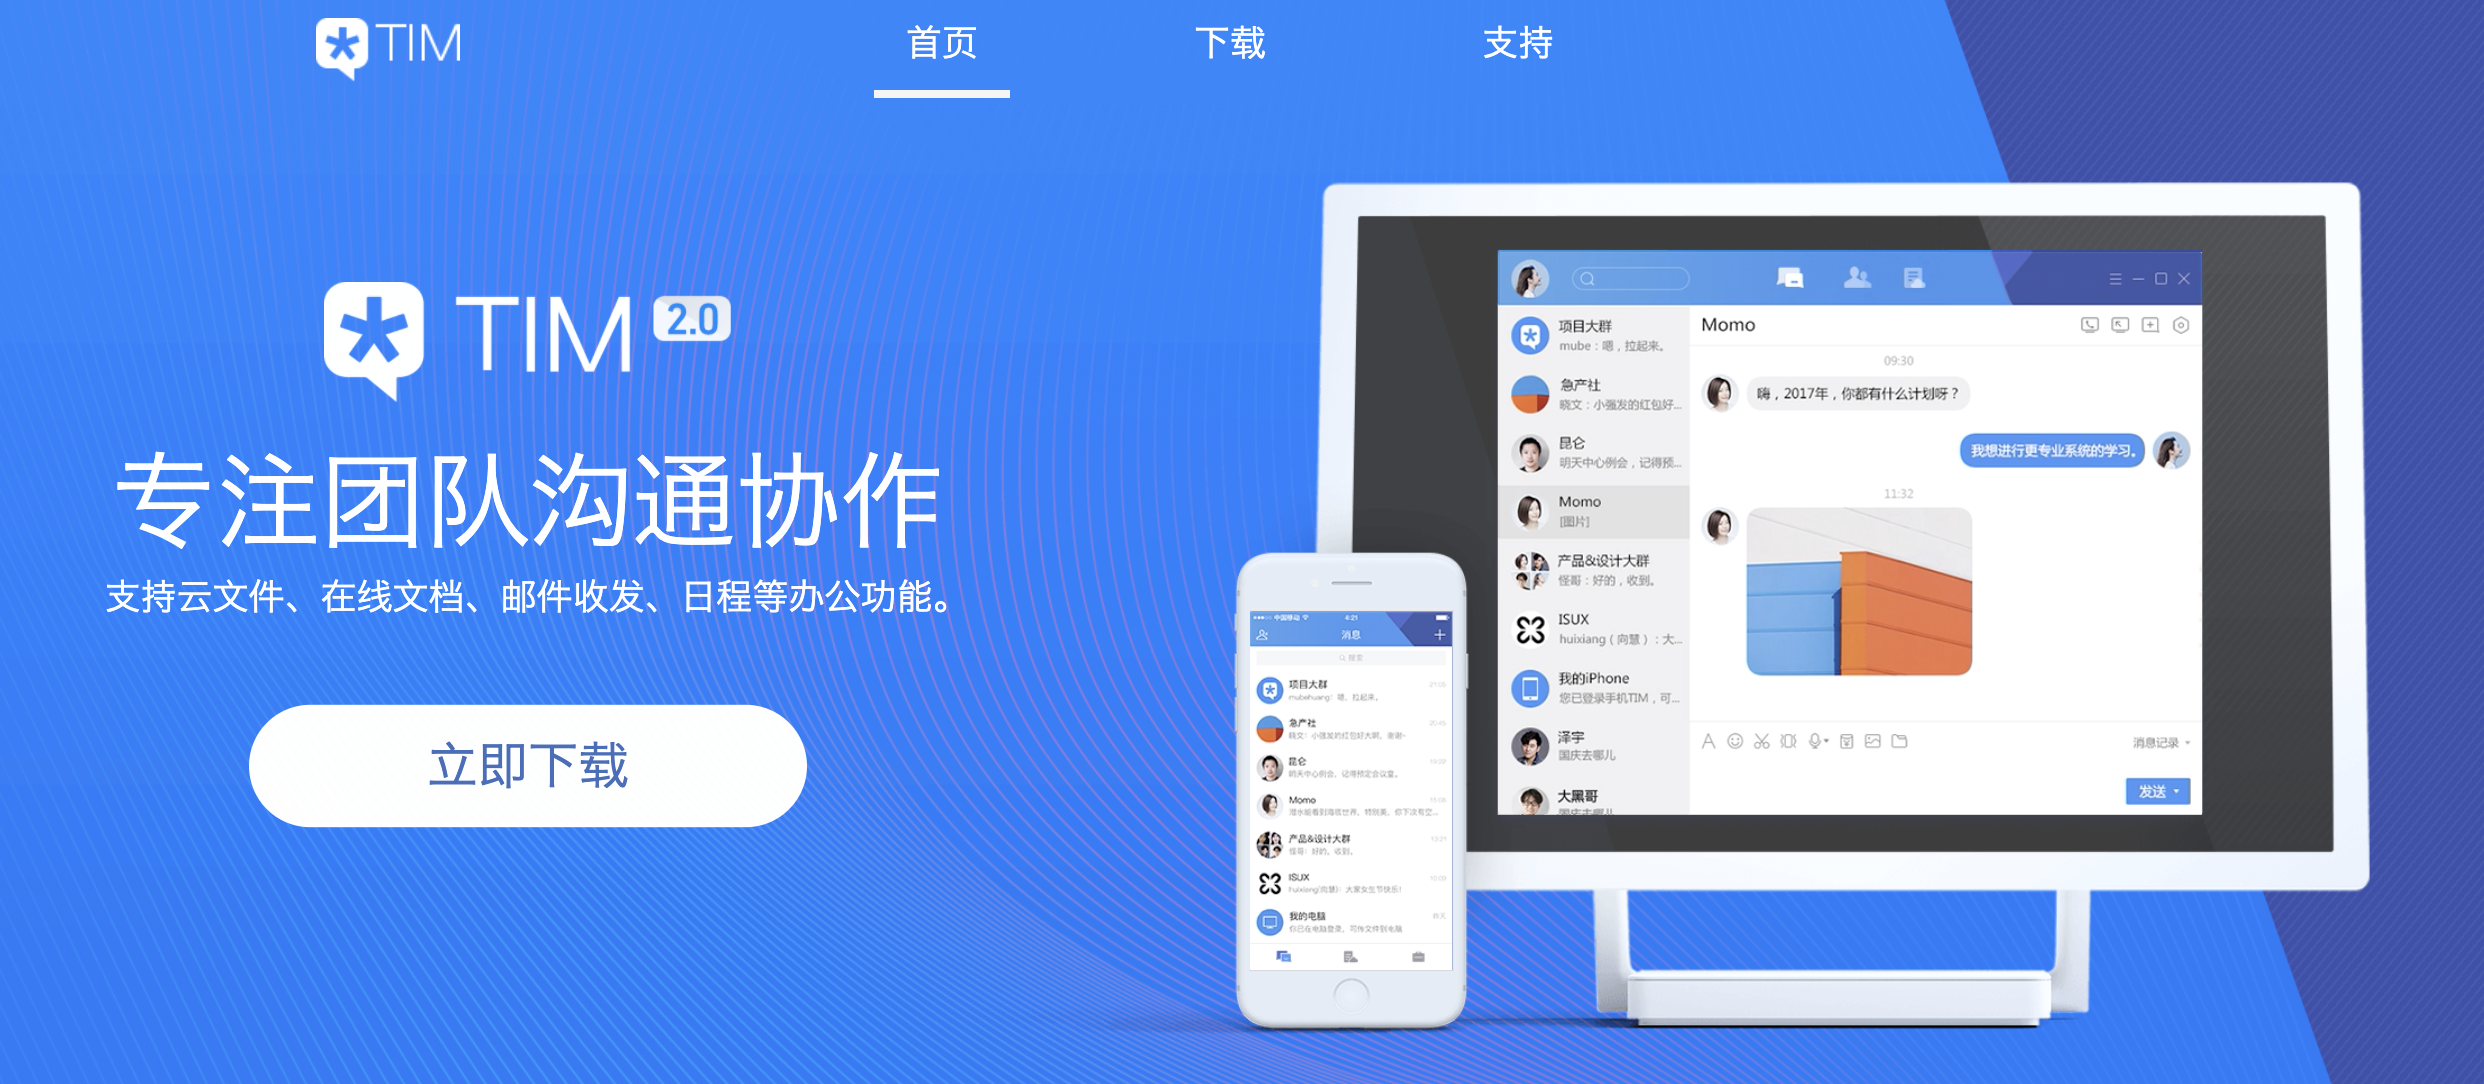 Tencent updates Tim workplace app amid strong growth from WeChat Work and collaboration software sector